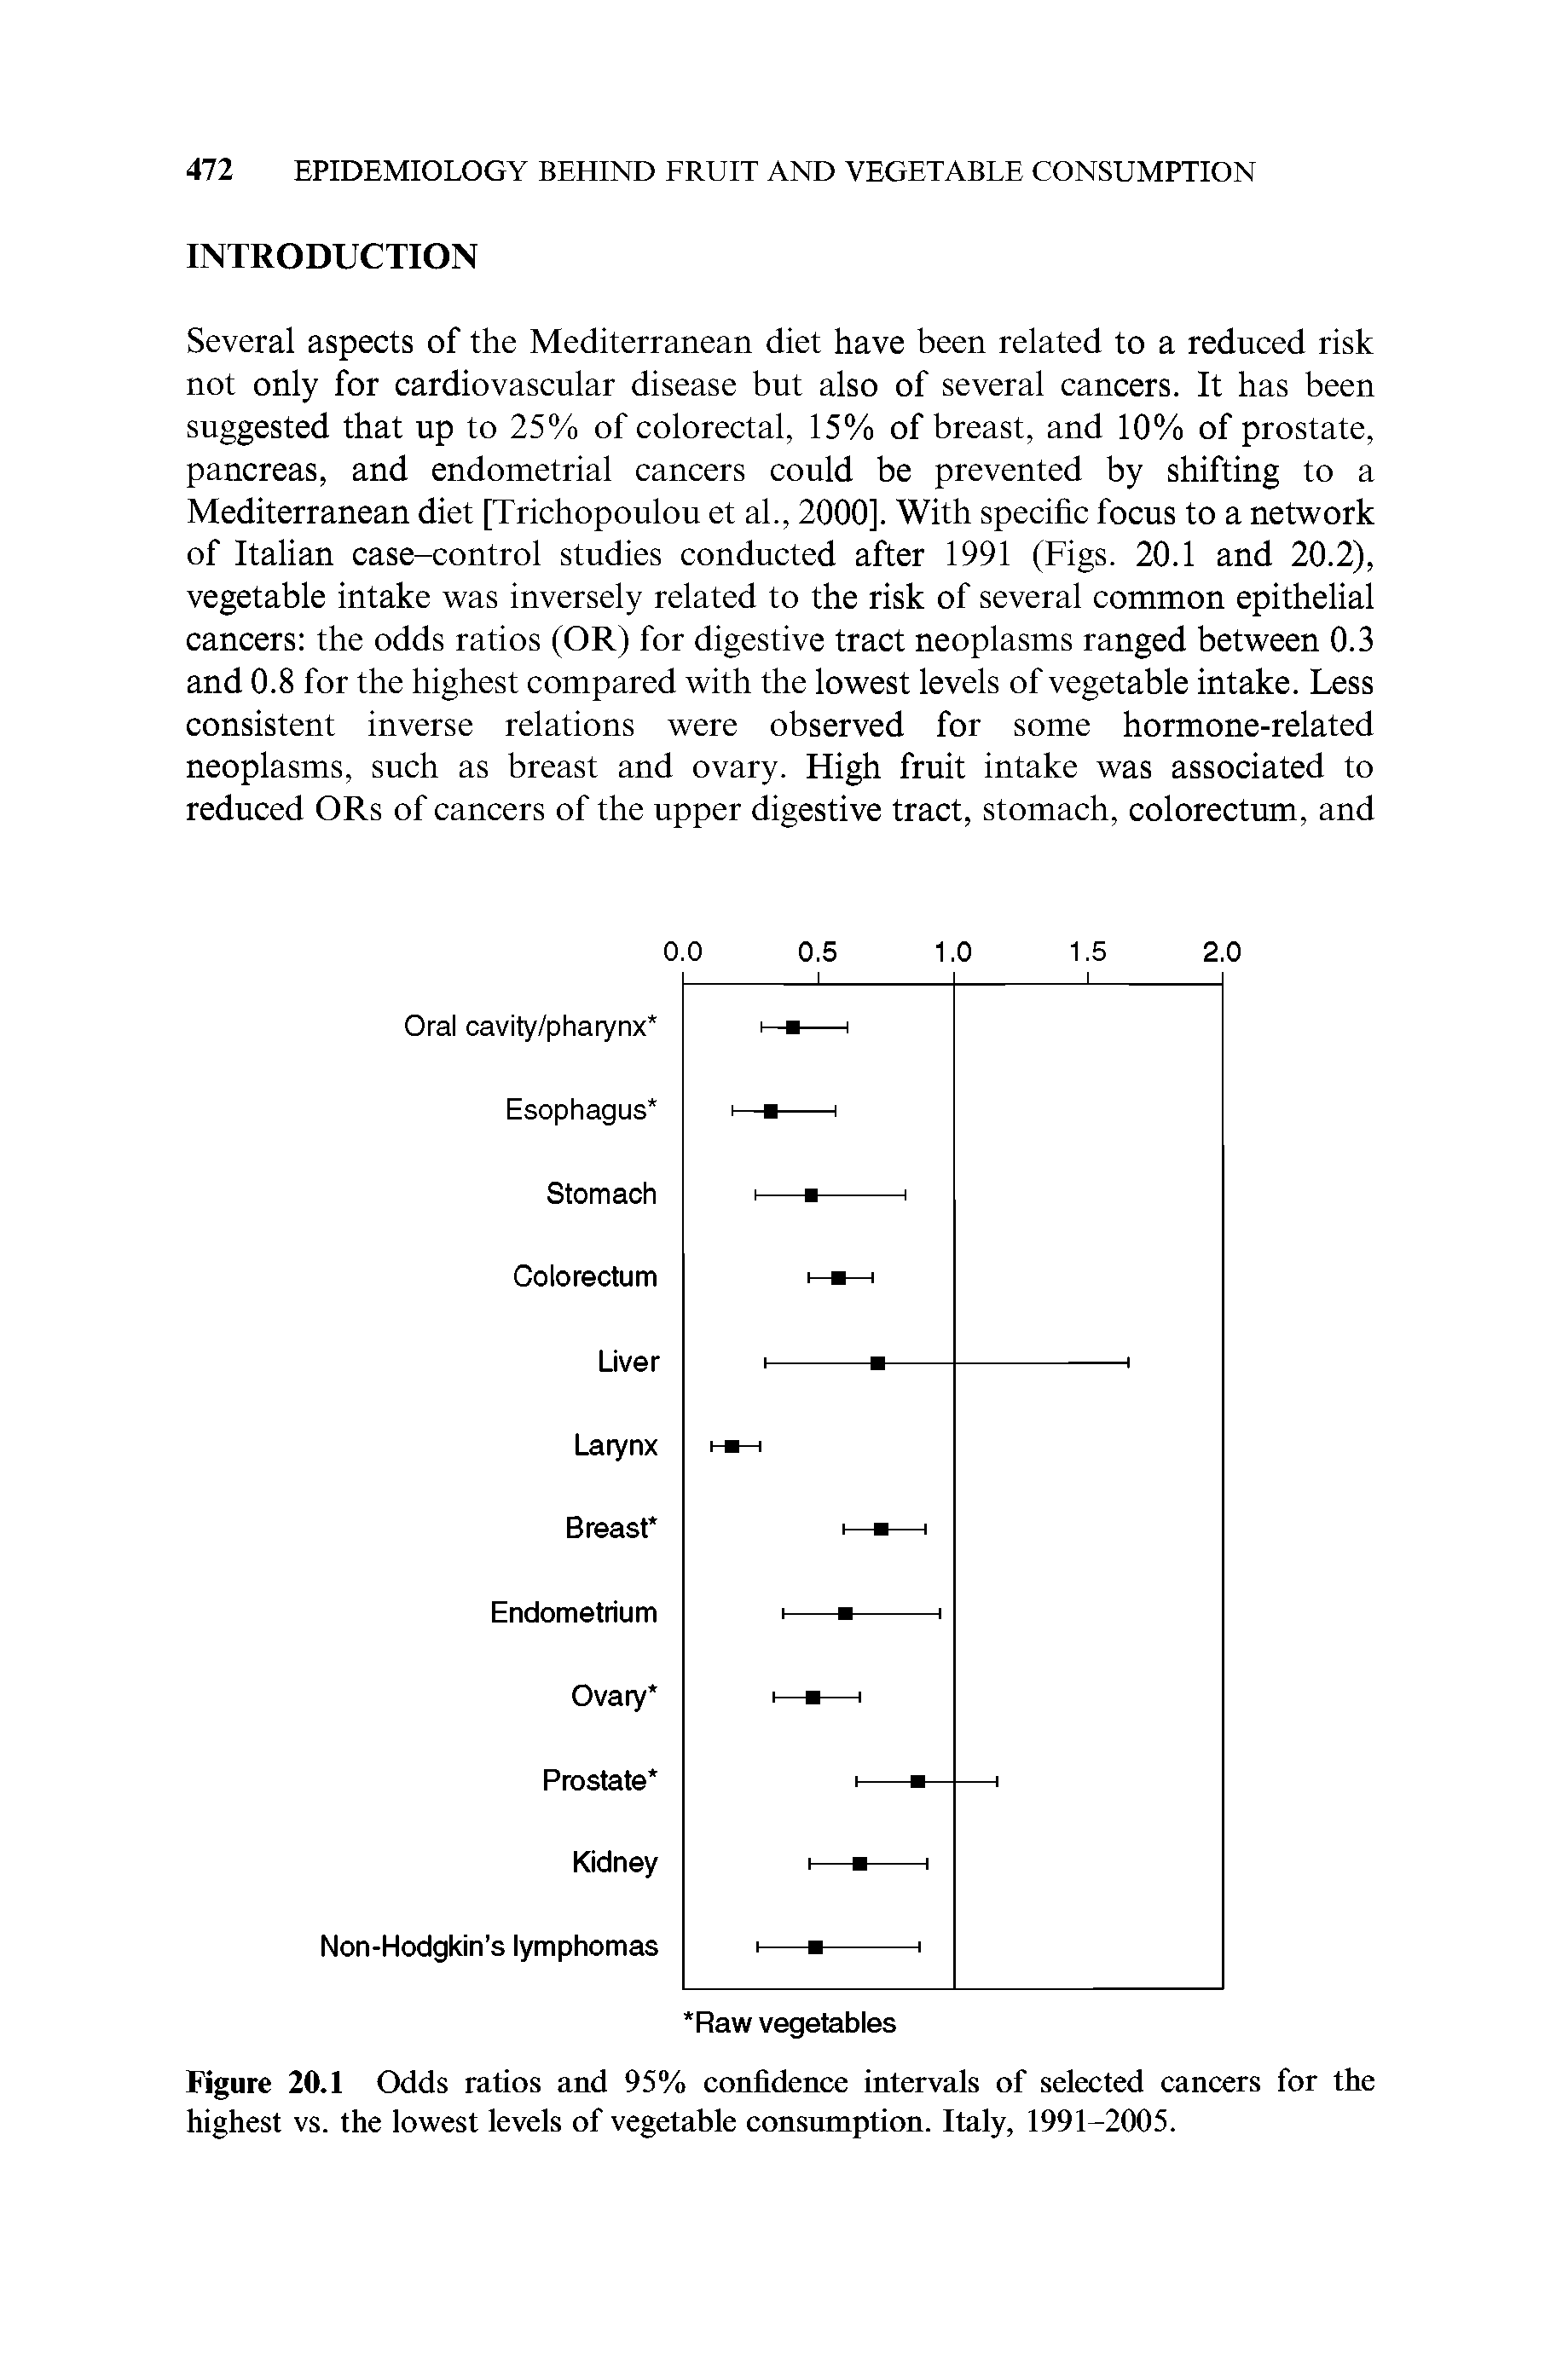 Figure 20.1 Odds ratios and 95% confidence intervals of selected cancers for the highest vs. the lowest levels of vegetable consumption. Italy, 1991-2005.